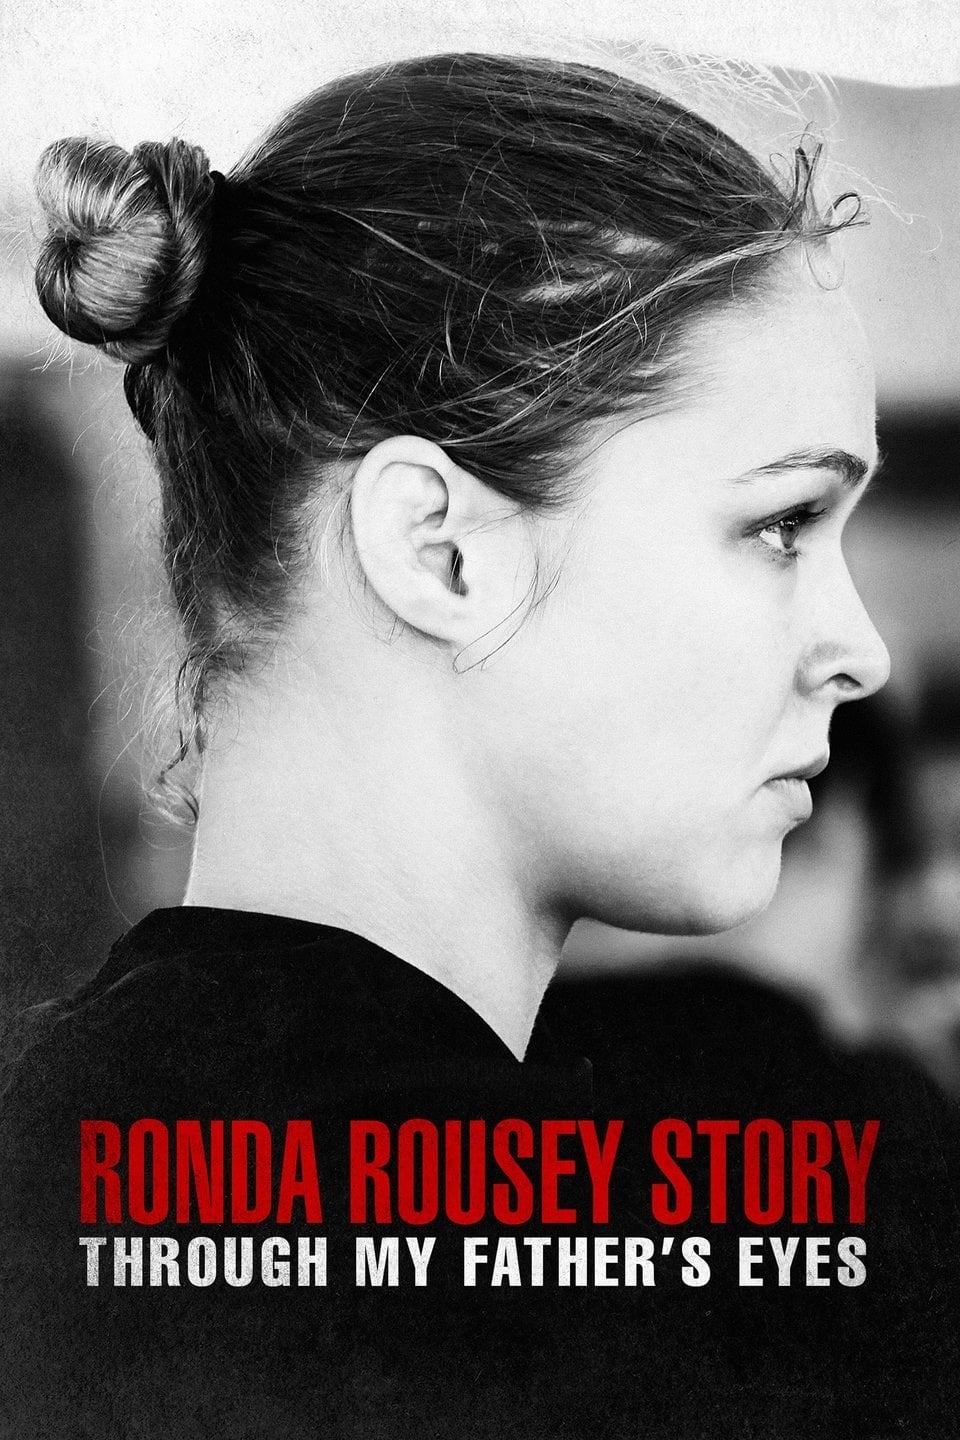 The Ronda Rousey Story: Through My Father s Eyes